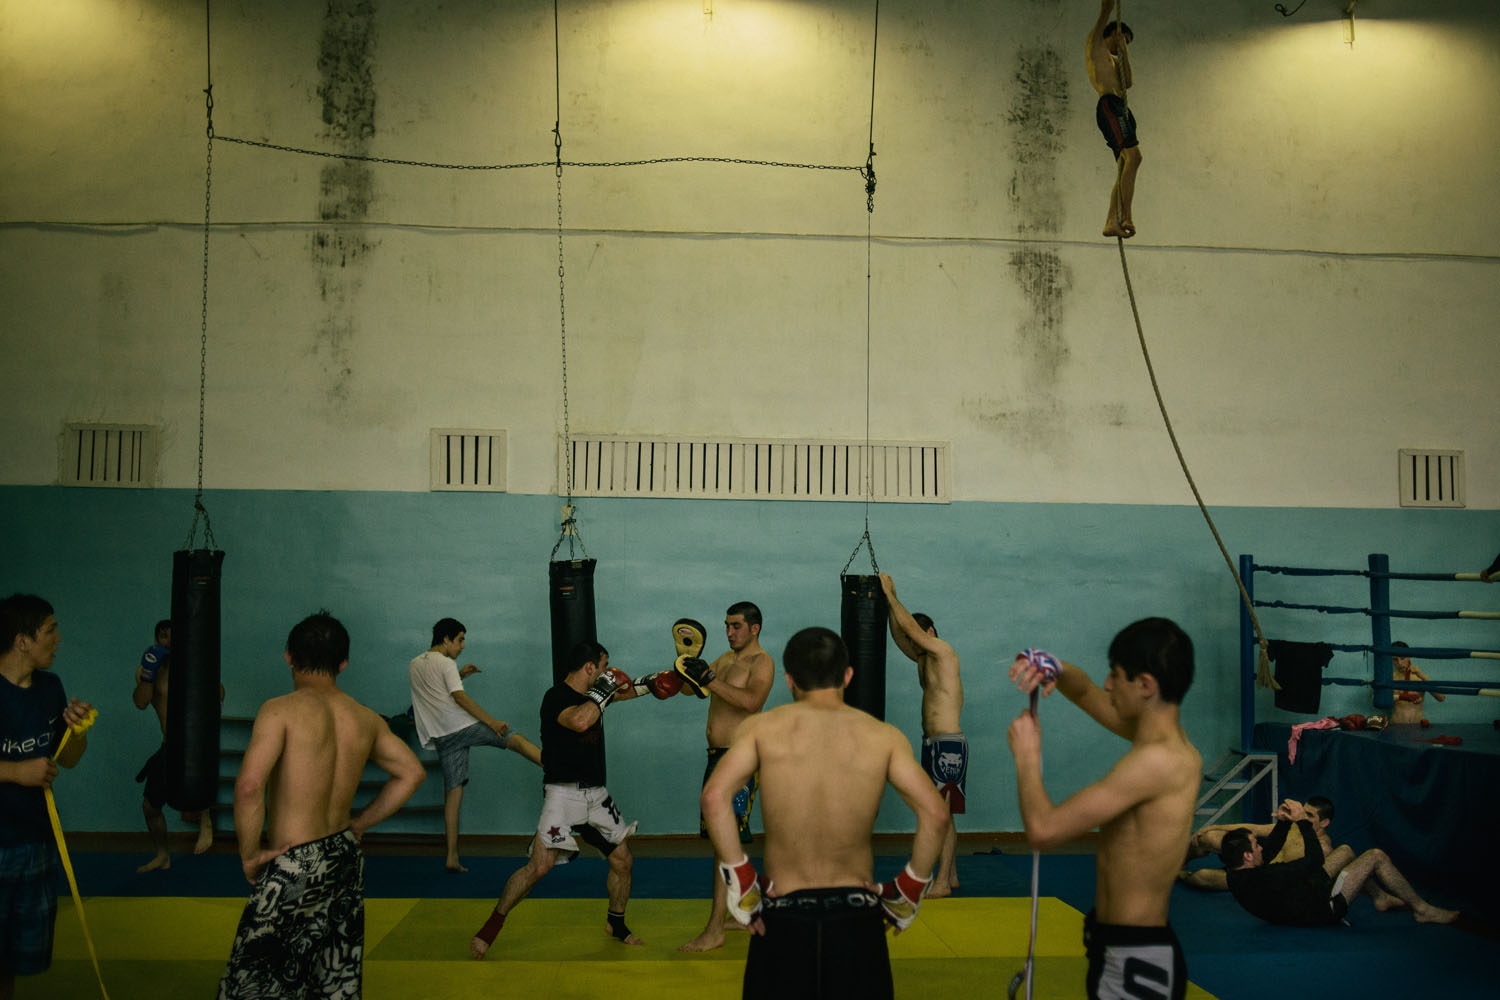 Dagestan youth train in  one of the box and wrestling school in Makhachkala on May 14, 2013.